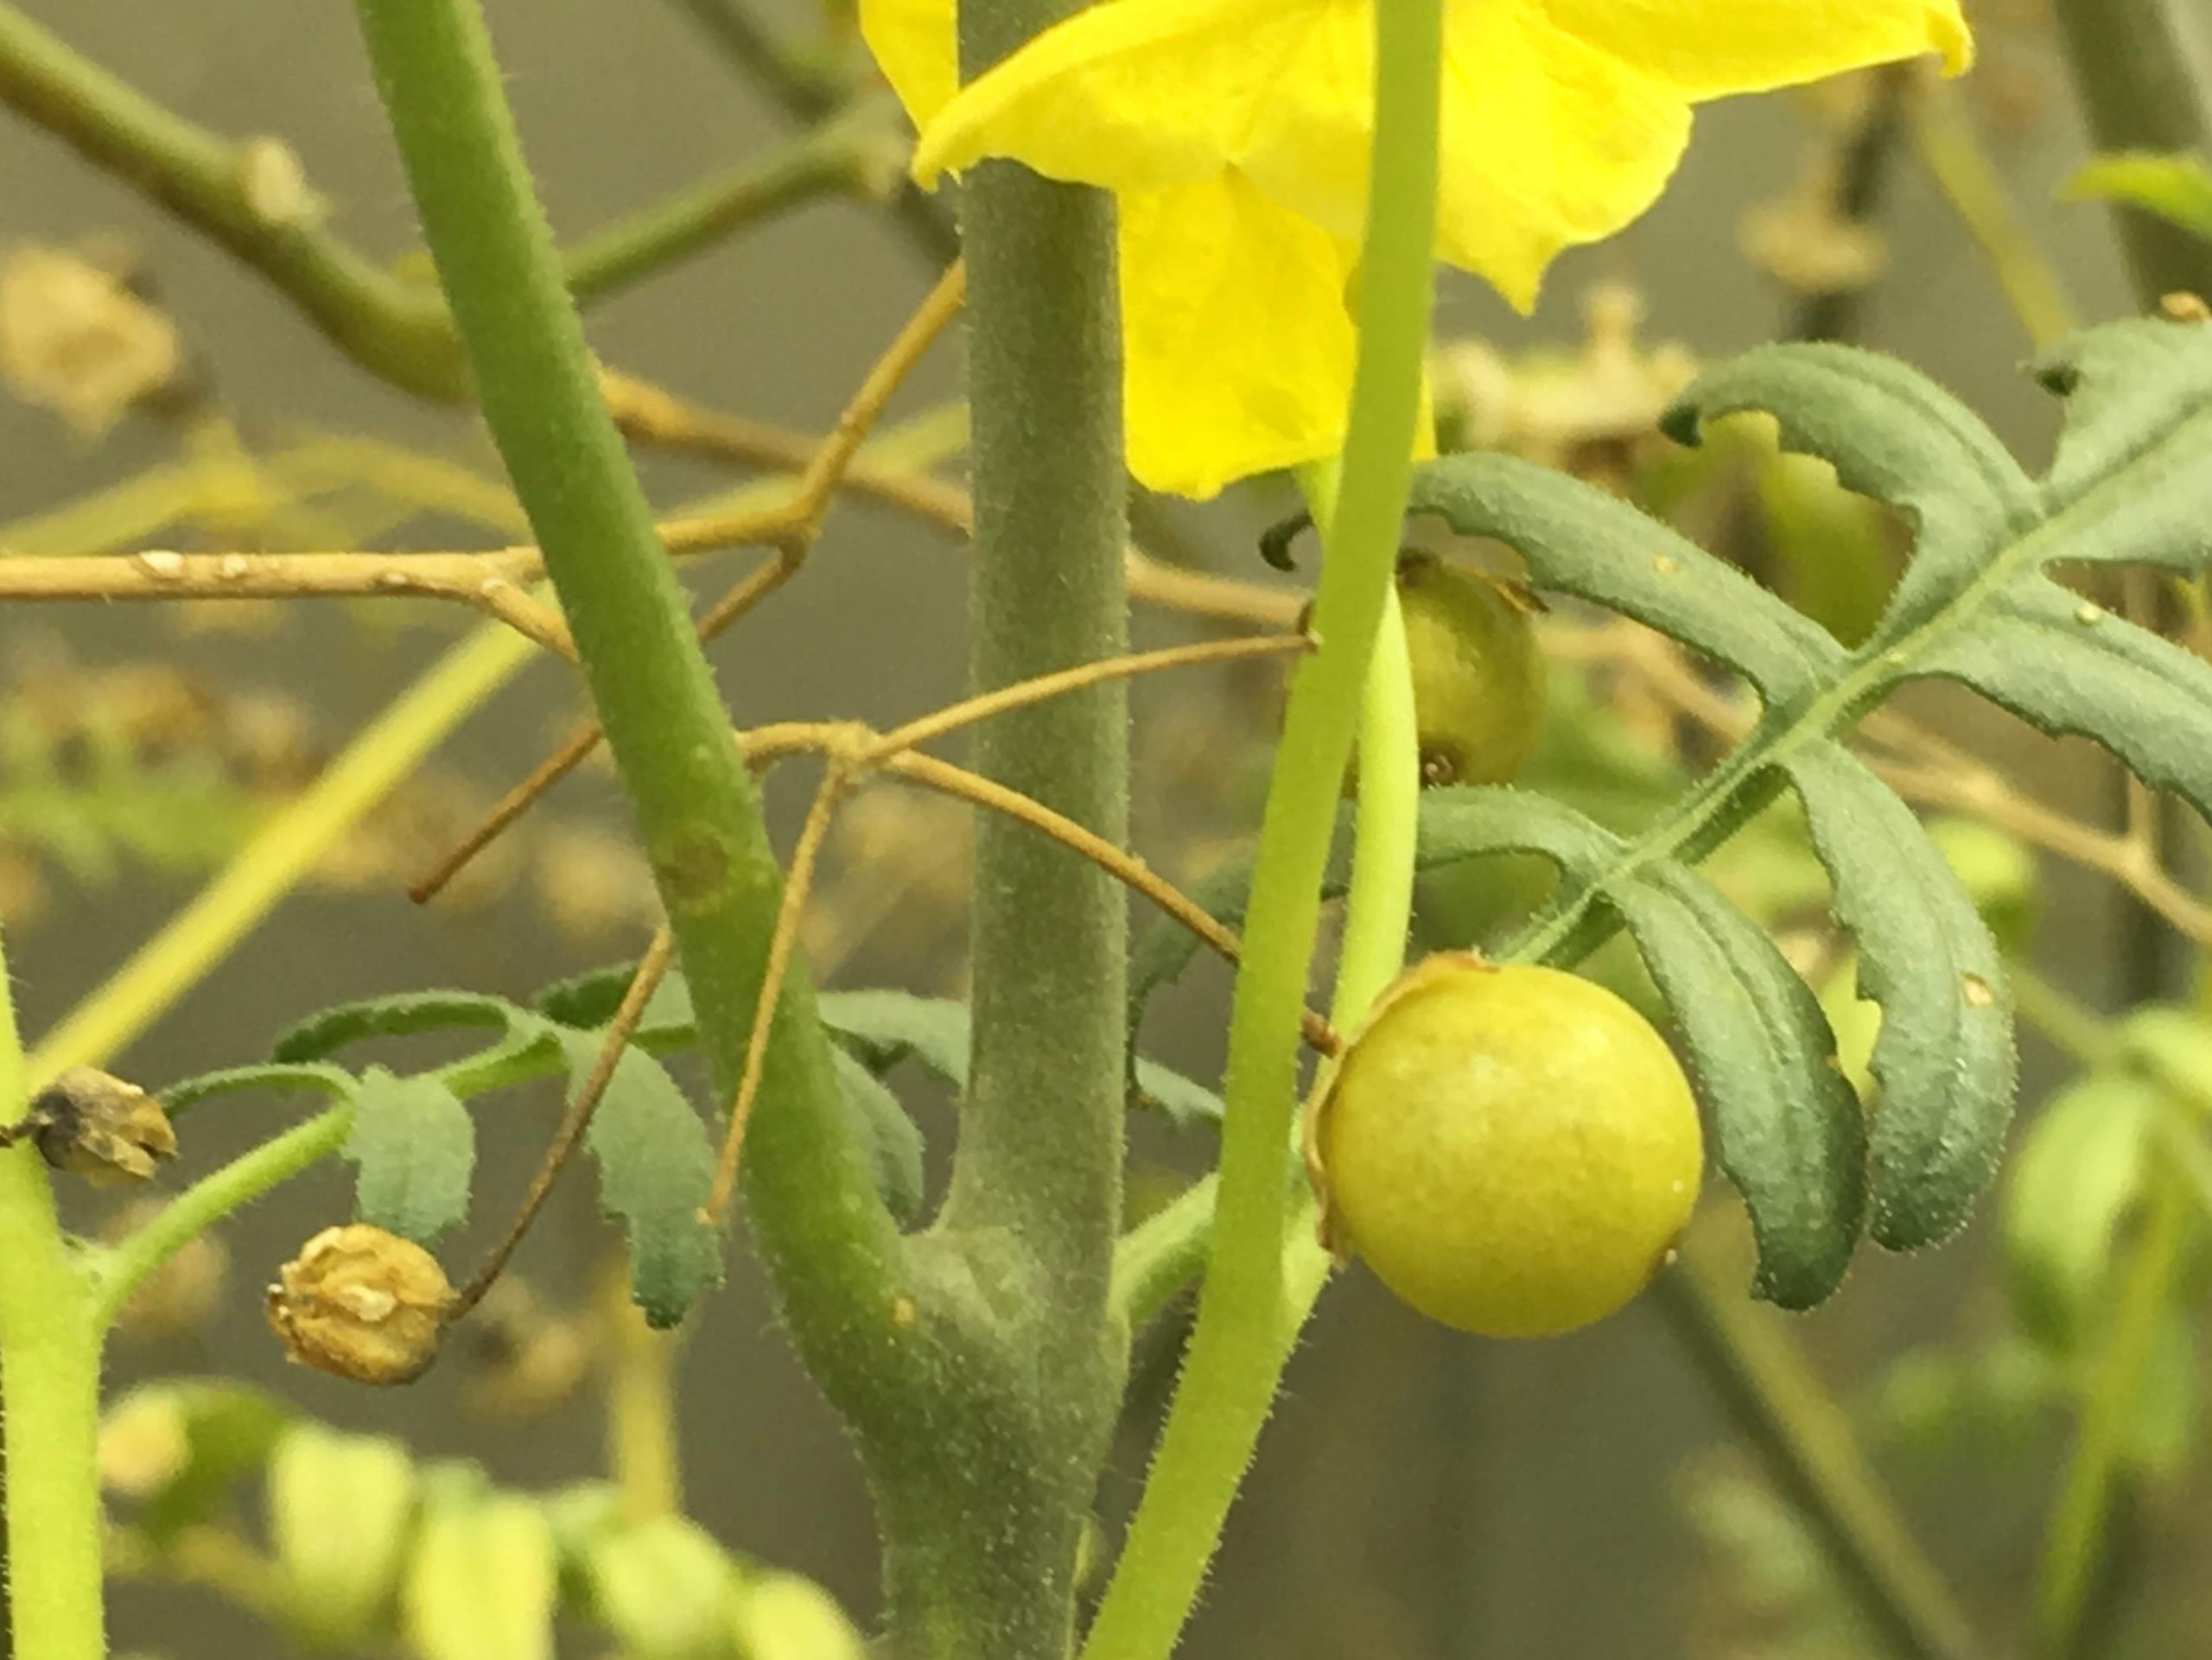 Closeup picture of a Solanum lycopersicoides fruit hanging from the plant. The fruit is about the size of a blueberry and yellow.